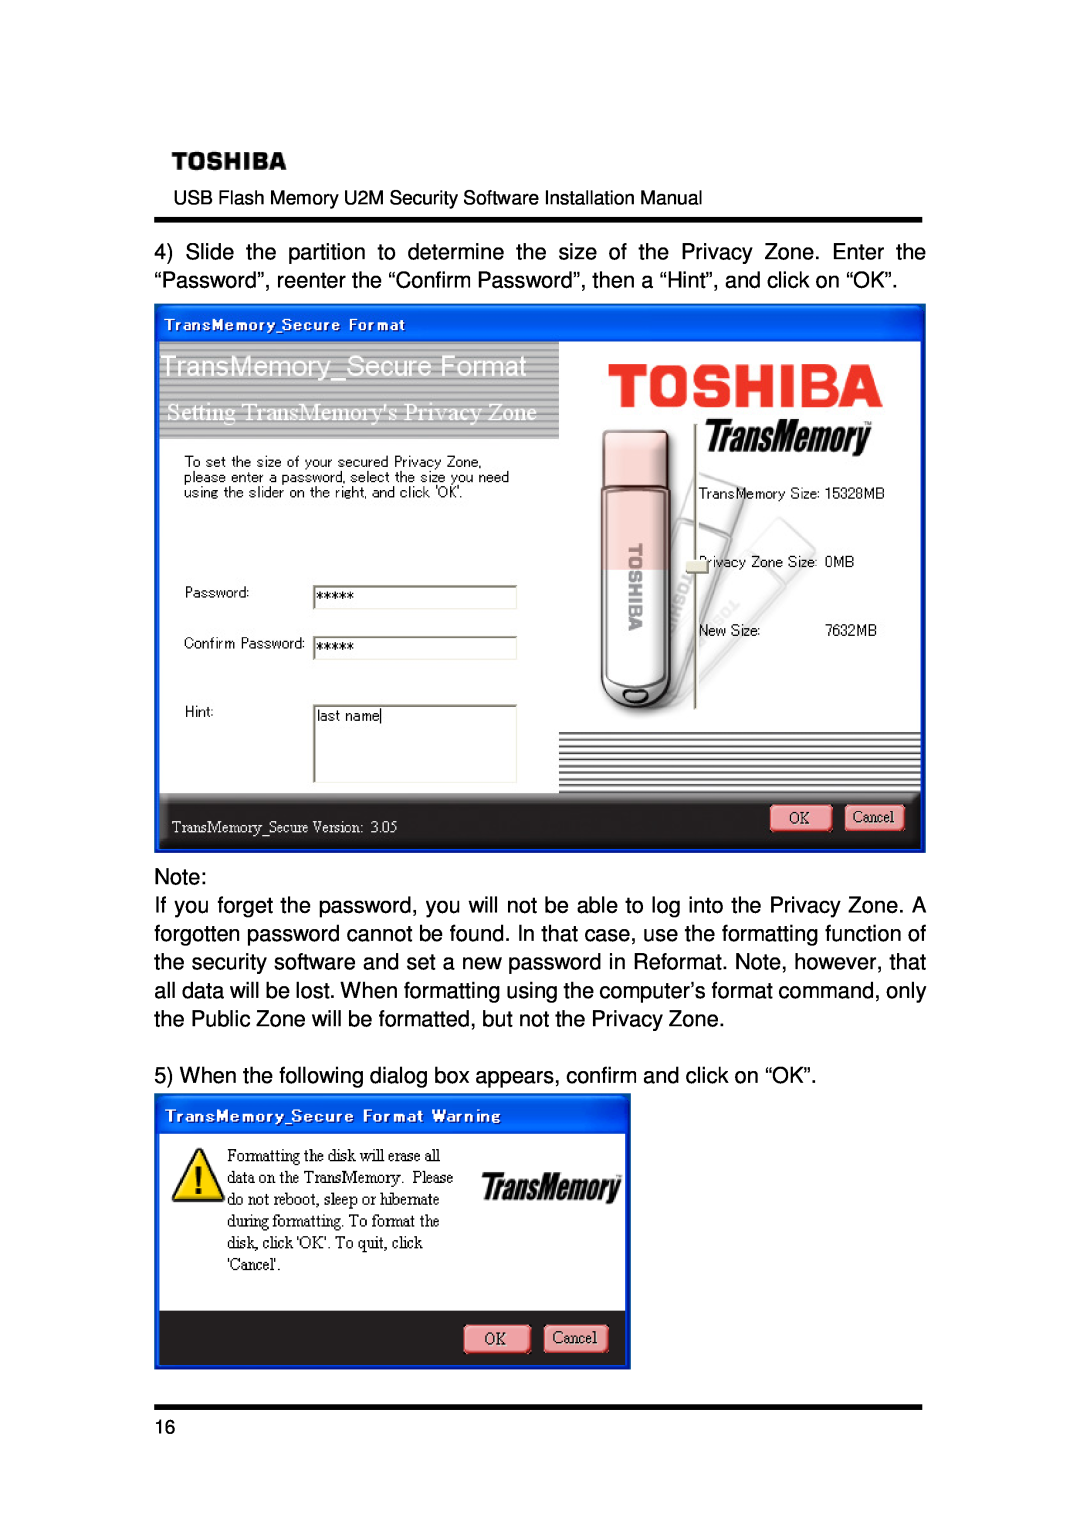 Toshiba U2M-004GT, U2M-016GT, U2M-008GT installation manual When the following dialog box appears, confirm and click on “OK” 